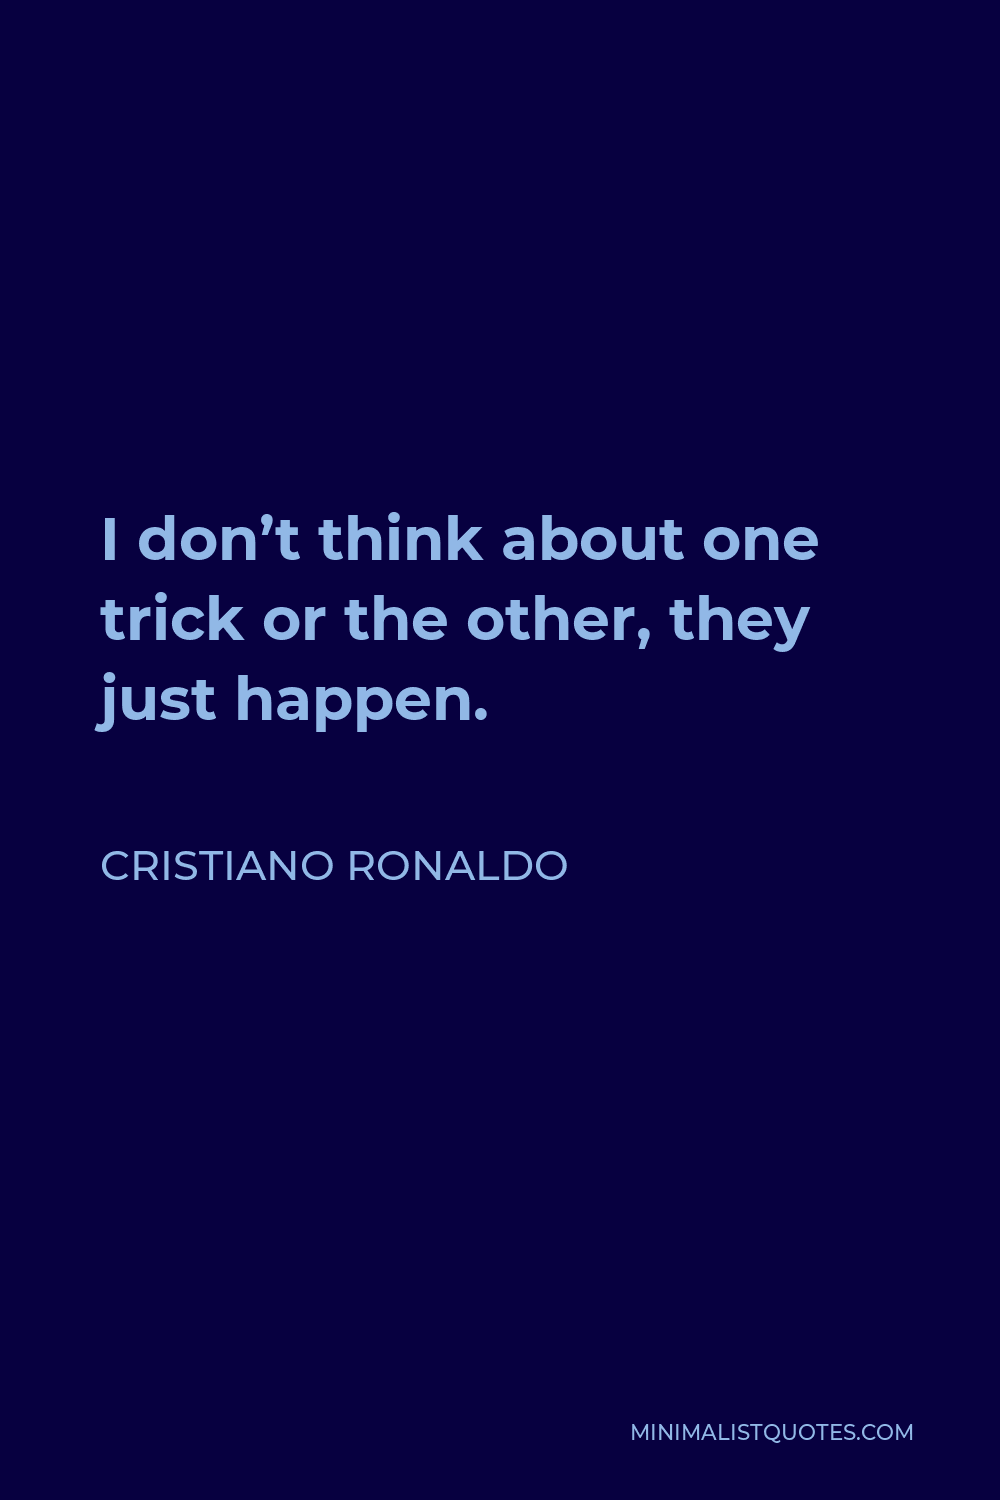 Cristiano Ronaldo Quote - I don’t think about one trick or the other, they just happen.